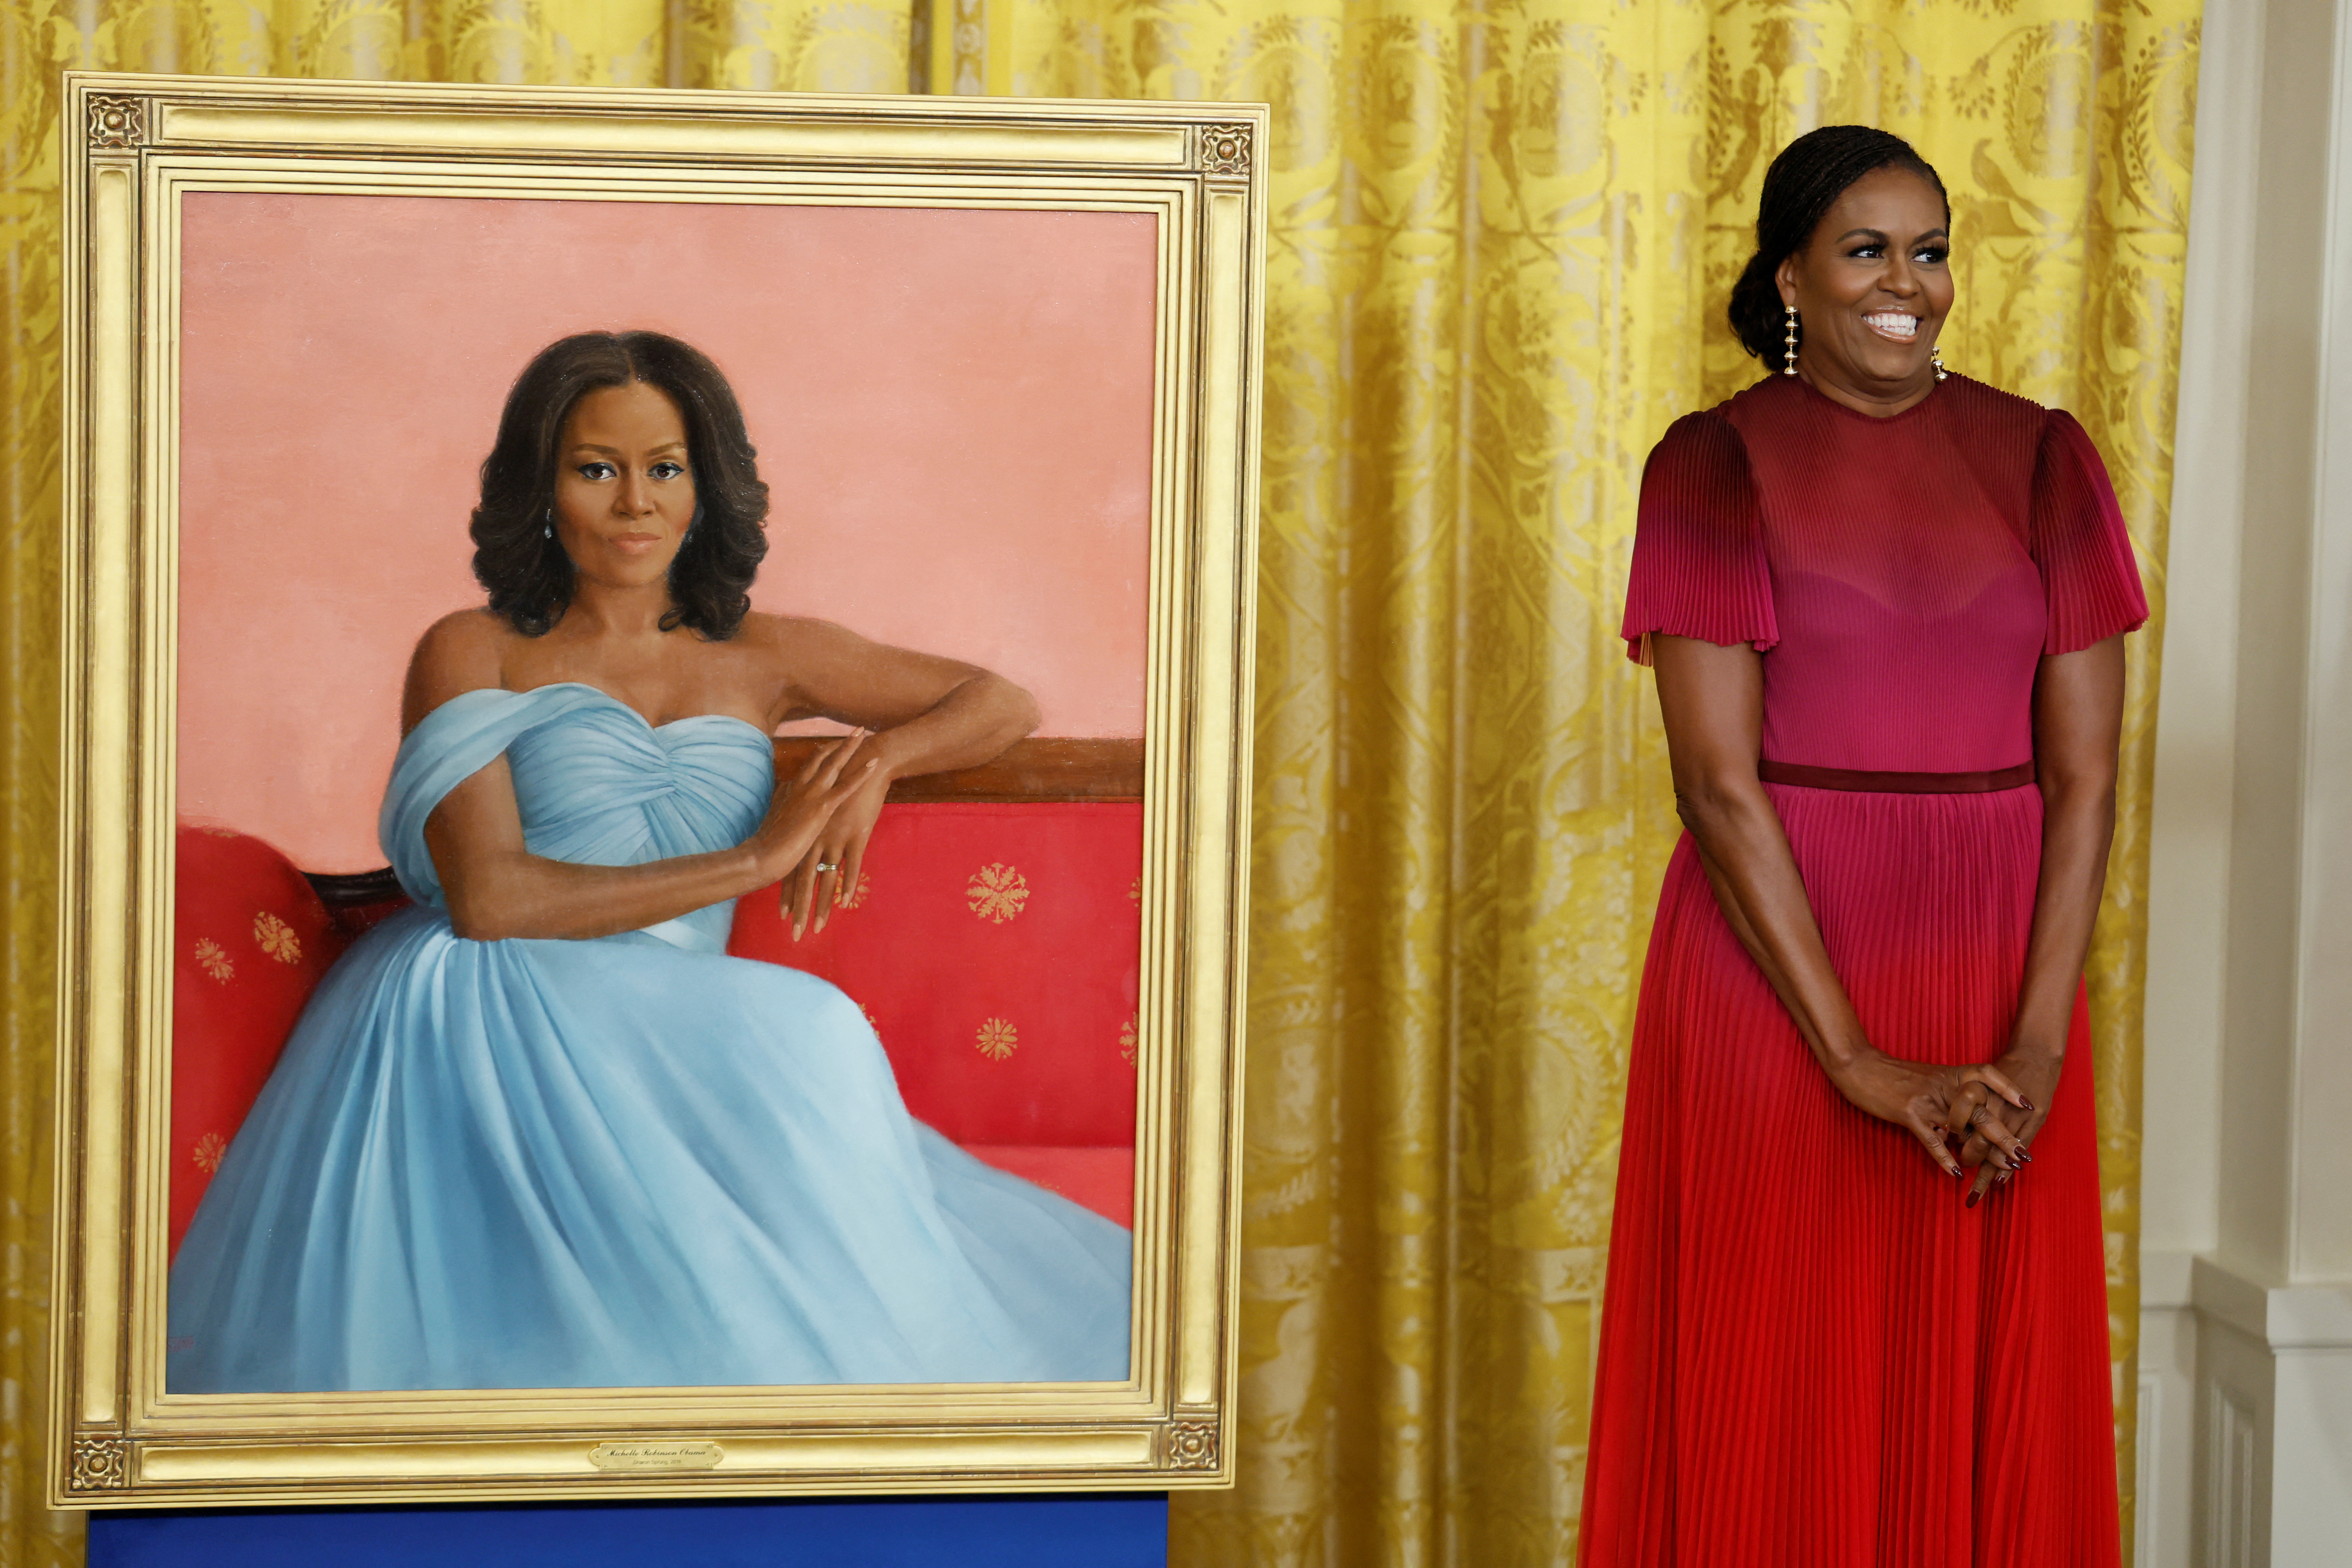 Former U.S. first lady Michelle Obama poses next to her official White House portrait, painted by Sharon Sprung, in the East Room of the White House, in Washington, U.S., September, 7, 2022. REUTERS/Evelyn Hockstein